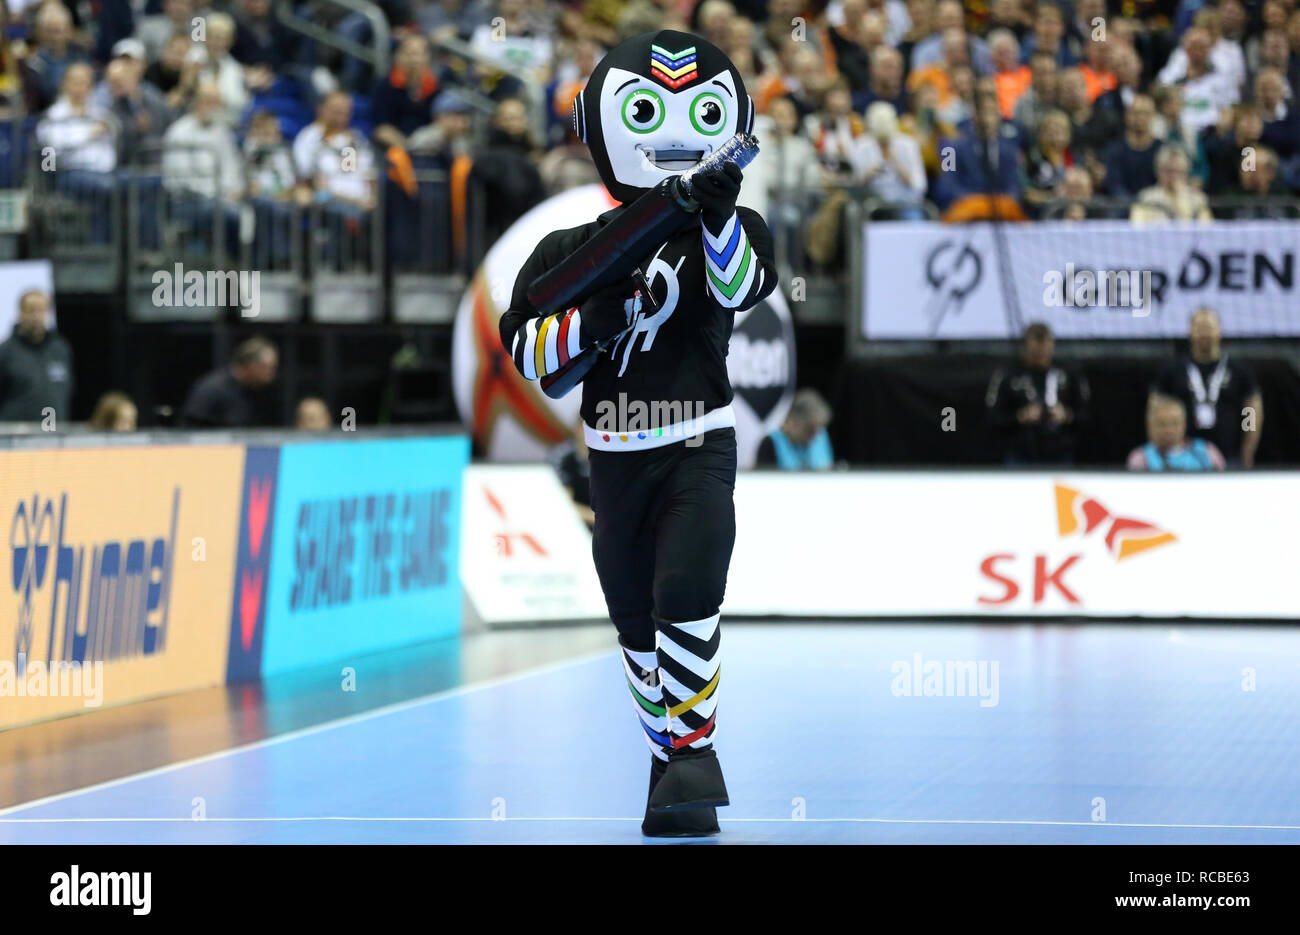 Berlin, Germany. 14th Jan, 2019. Handball IHF Men's World Championship: The handball world championship's mascott during a time-out Credit: Mickael Chavet/Alamy Live News Stock Photo